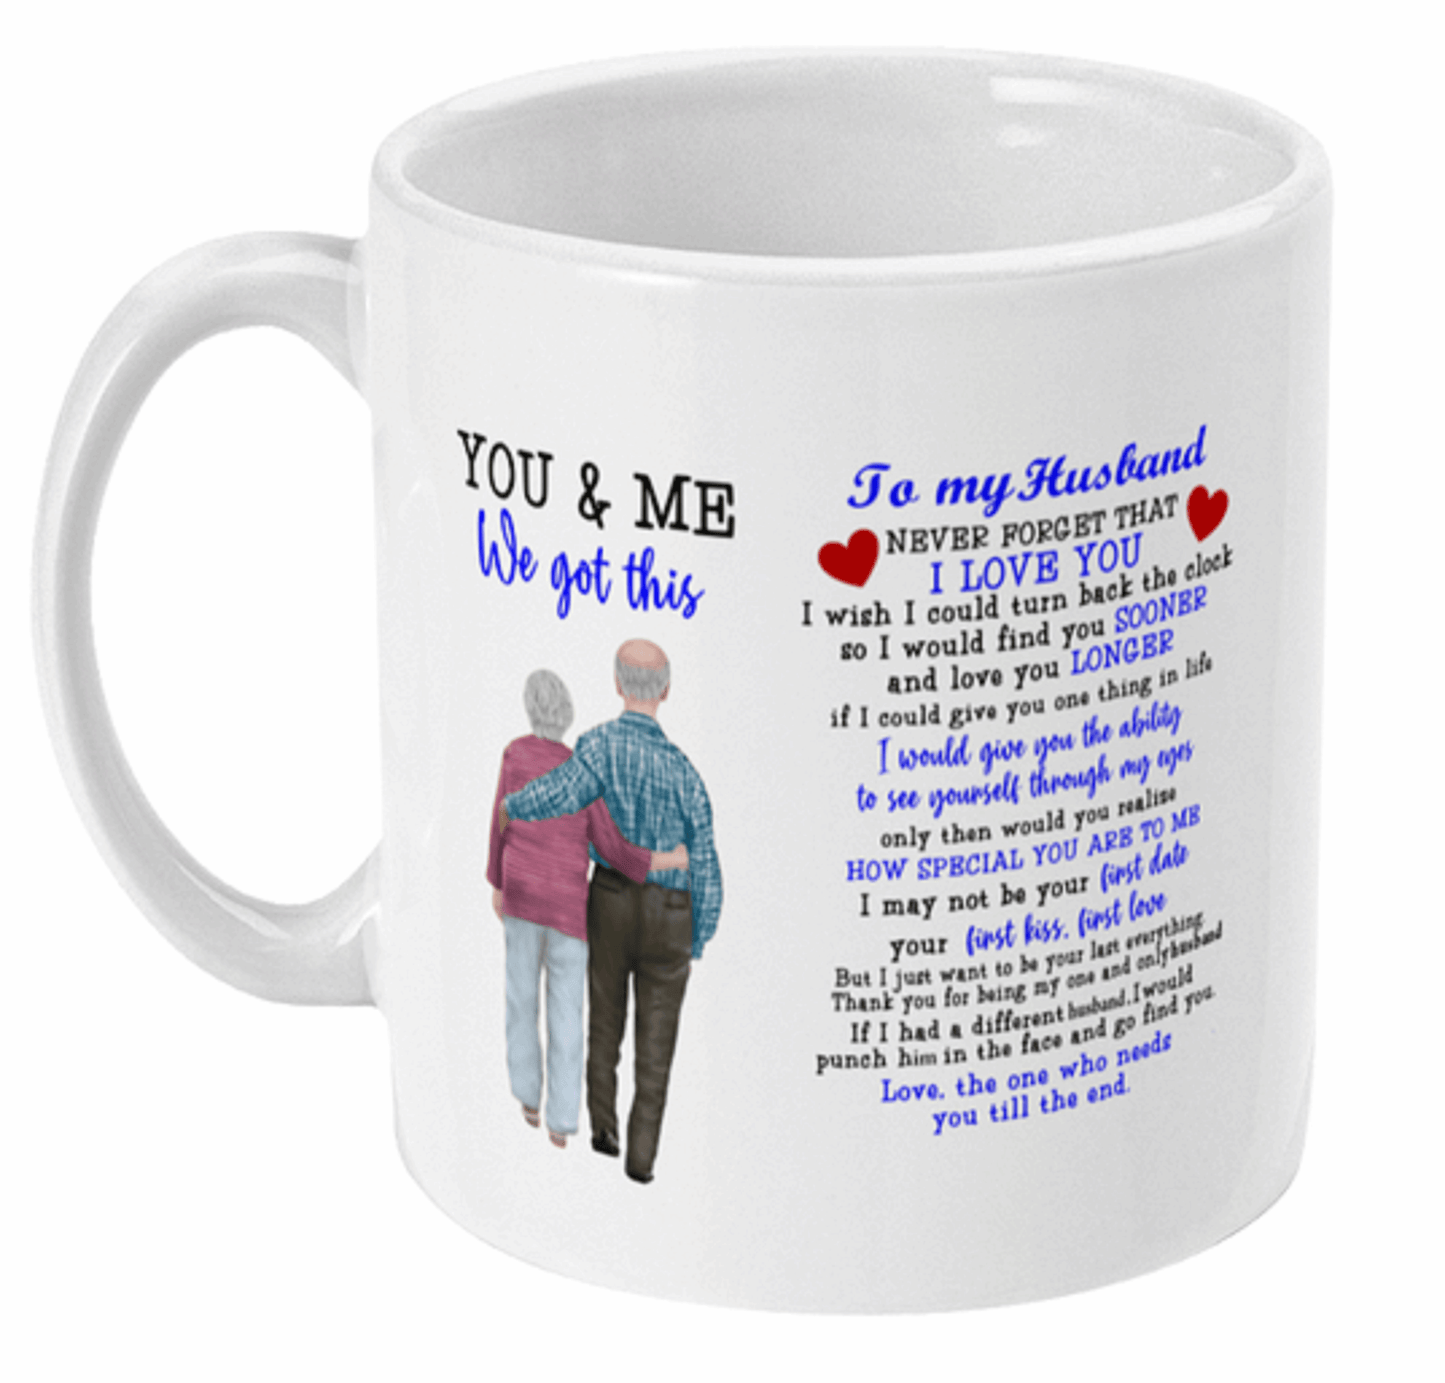  You and Me We Got This Husband or Wife Mug by Free Spirit Accessories sold by Free Spirit Accessories